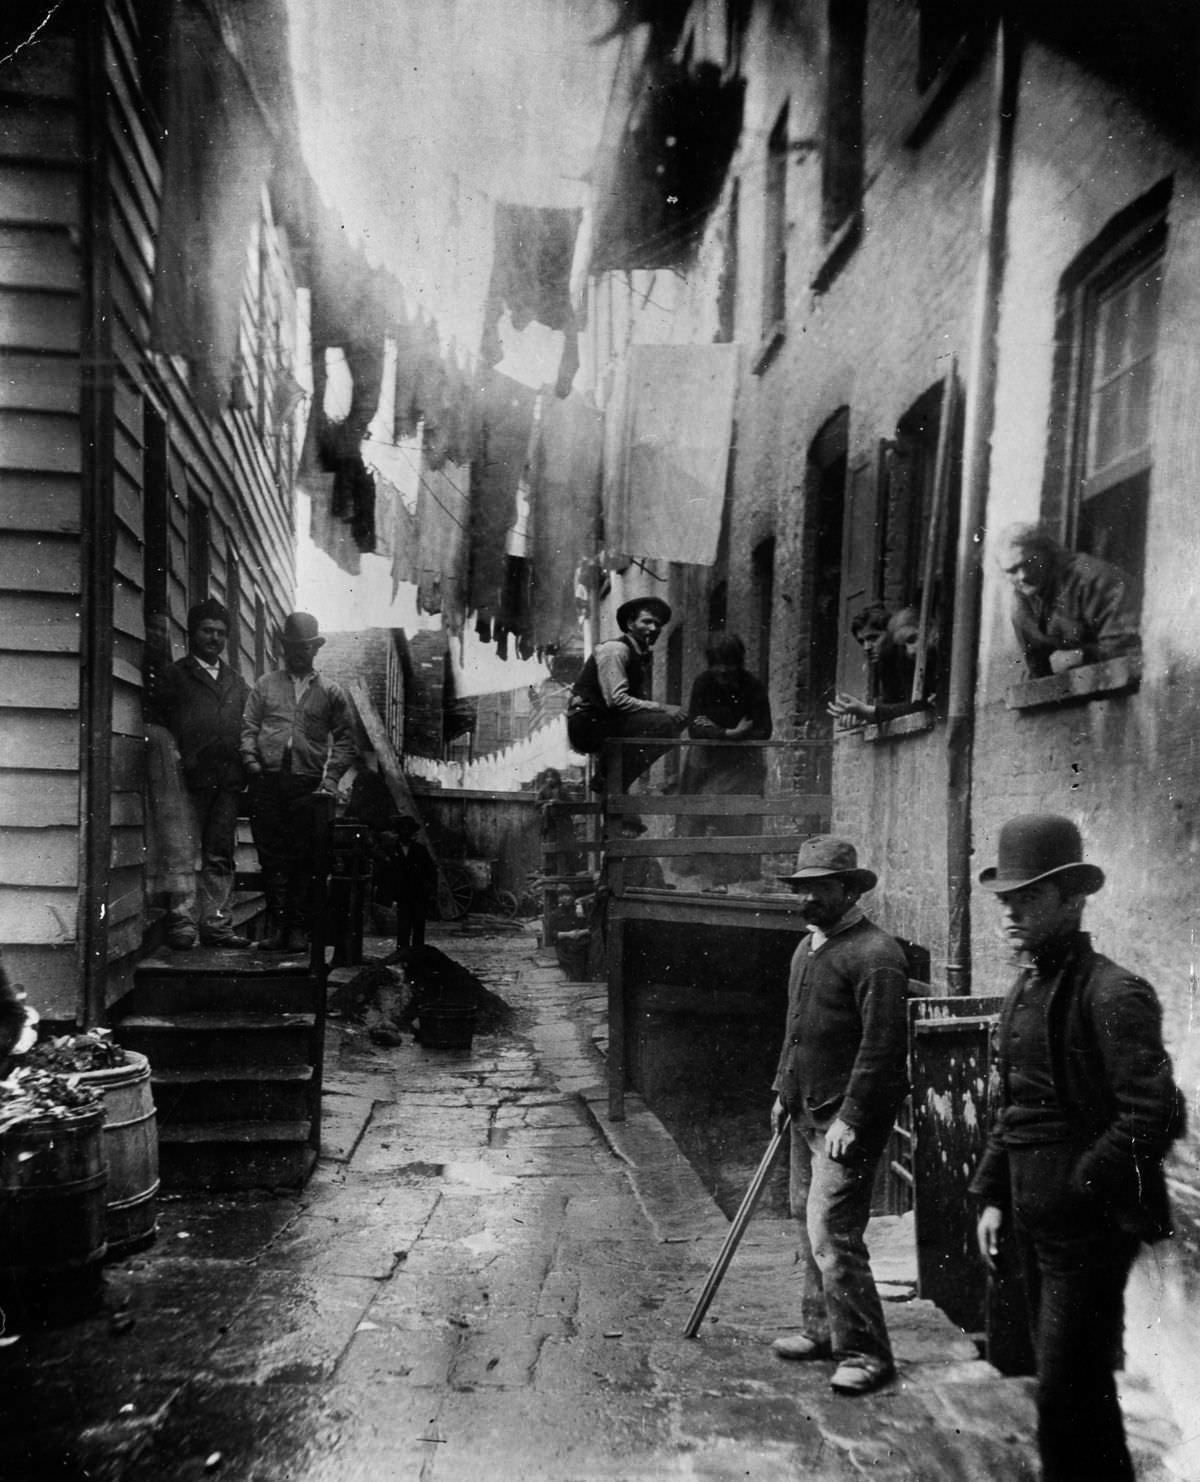 A group of men loiter in an alley off Mulberry Street known as "Bandits' Roost." 1888